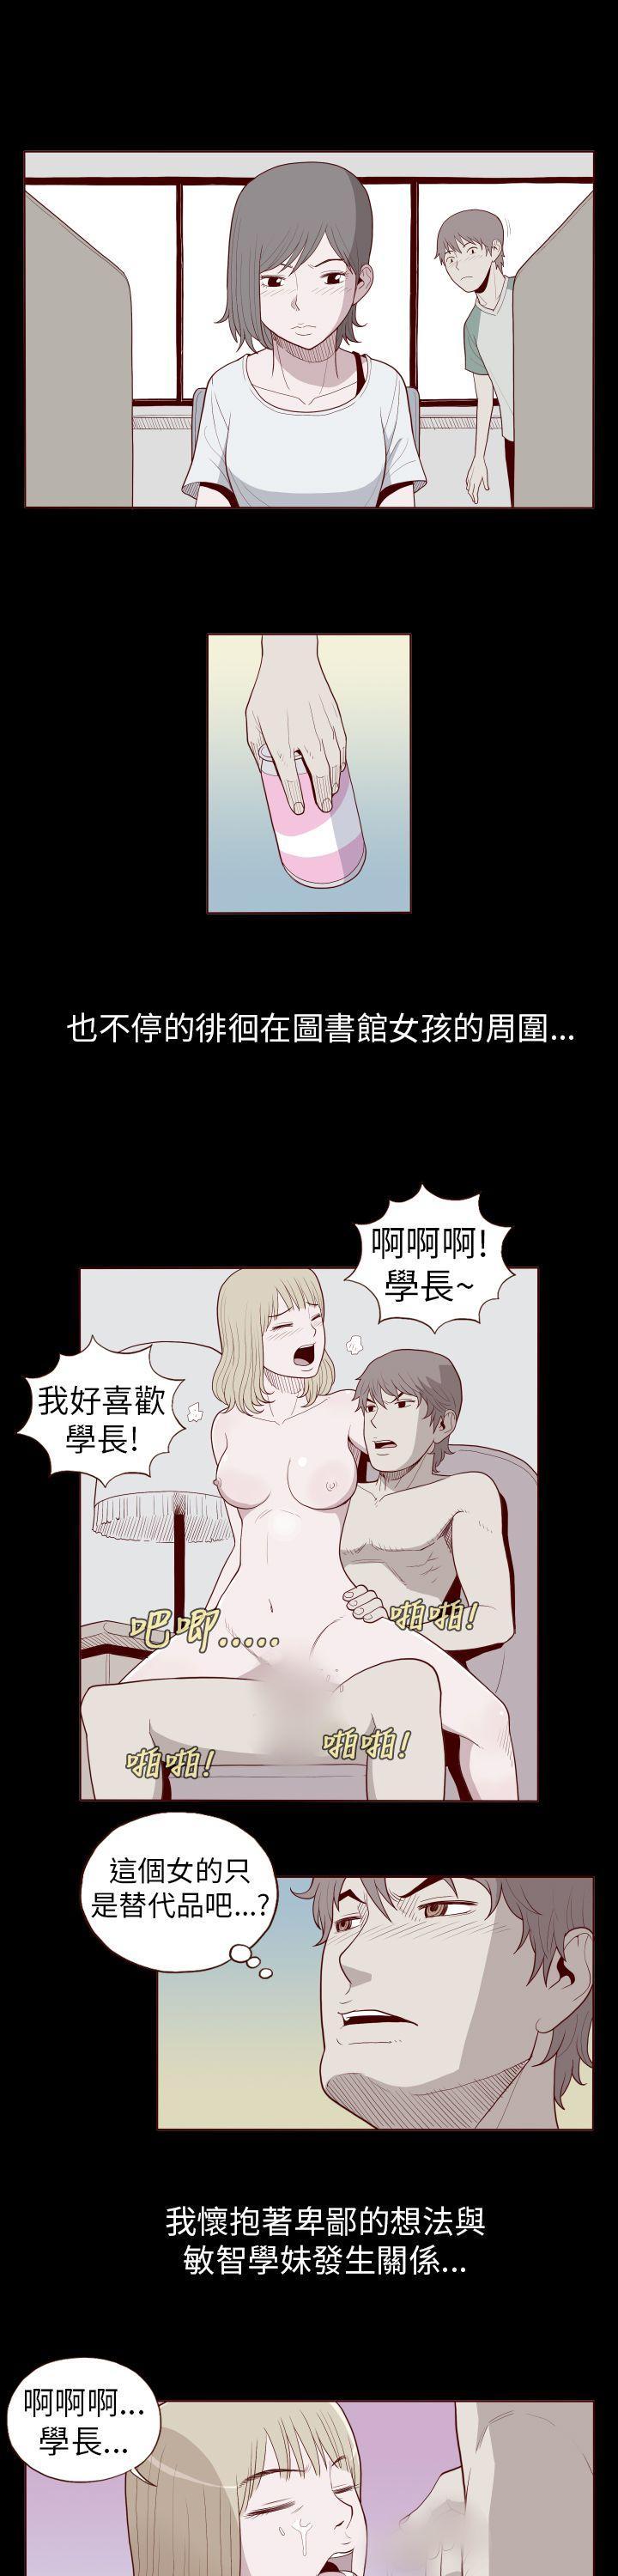 Free Blowjobs 淫亂魔鬼 Ex Girlfriends - Page 5